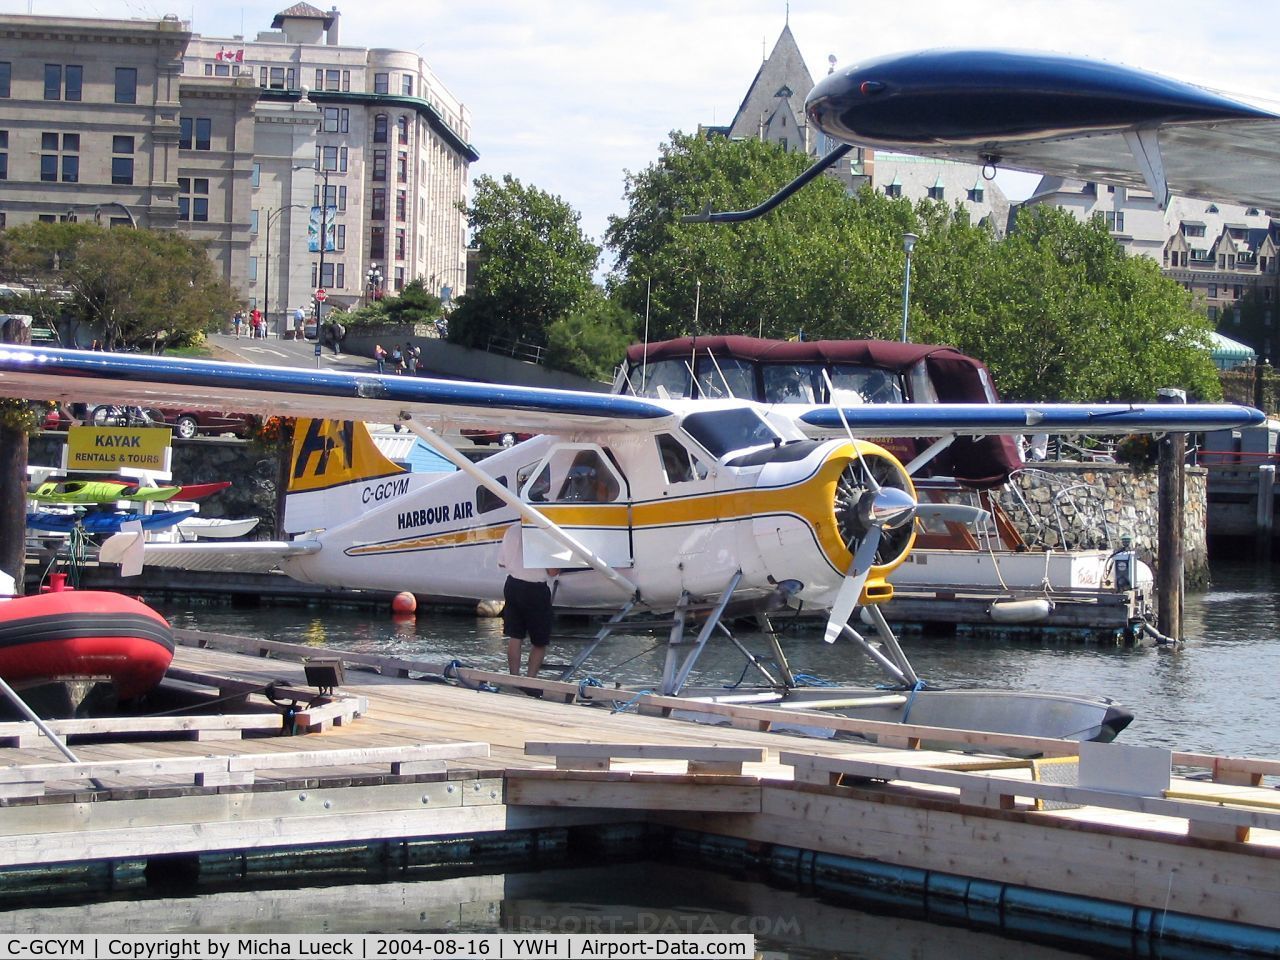 C-GCYM, 1953 De Havilland Canada DHC-2 Beaver Mk.1 C/N 354, The floatplanes in Victoria share the harbour with kayaks, fishing boats, and whale watching zodiacs